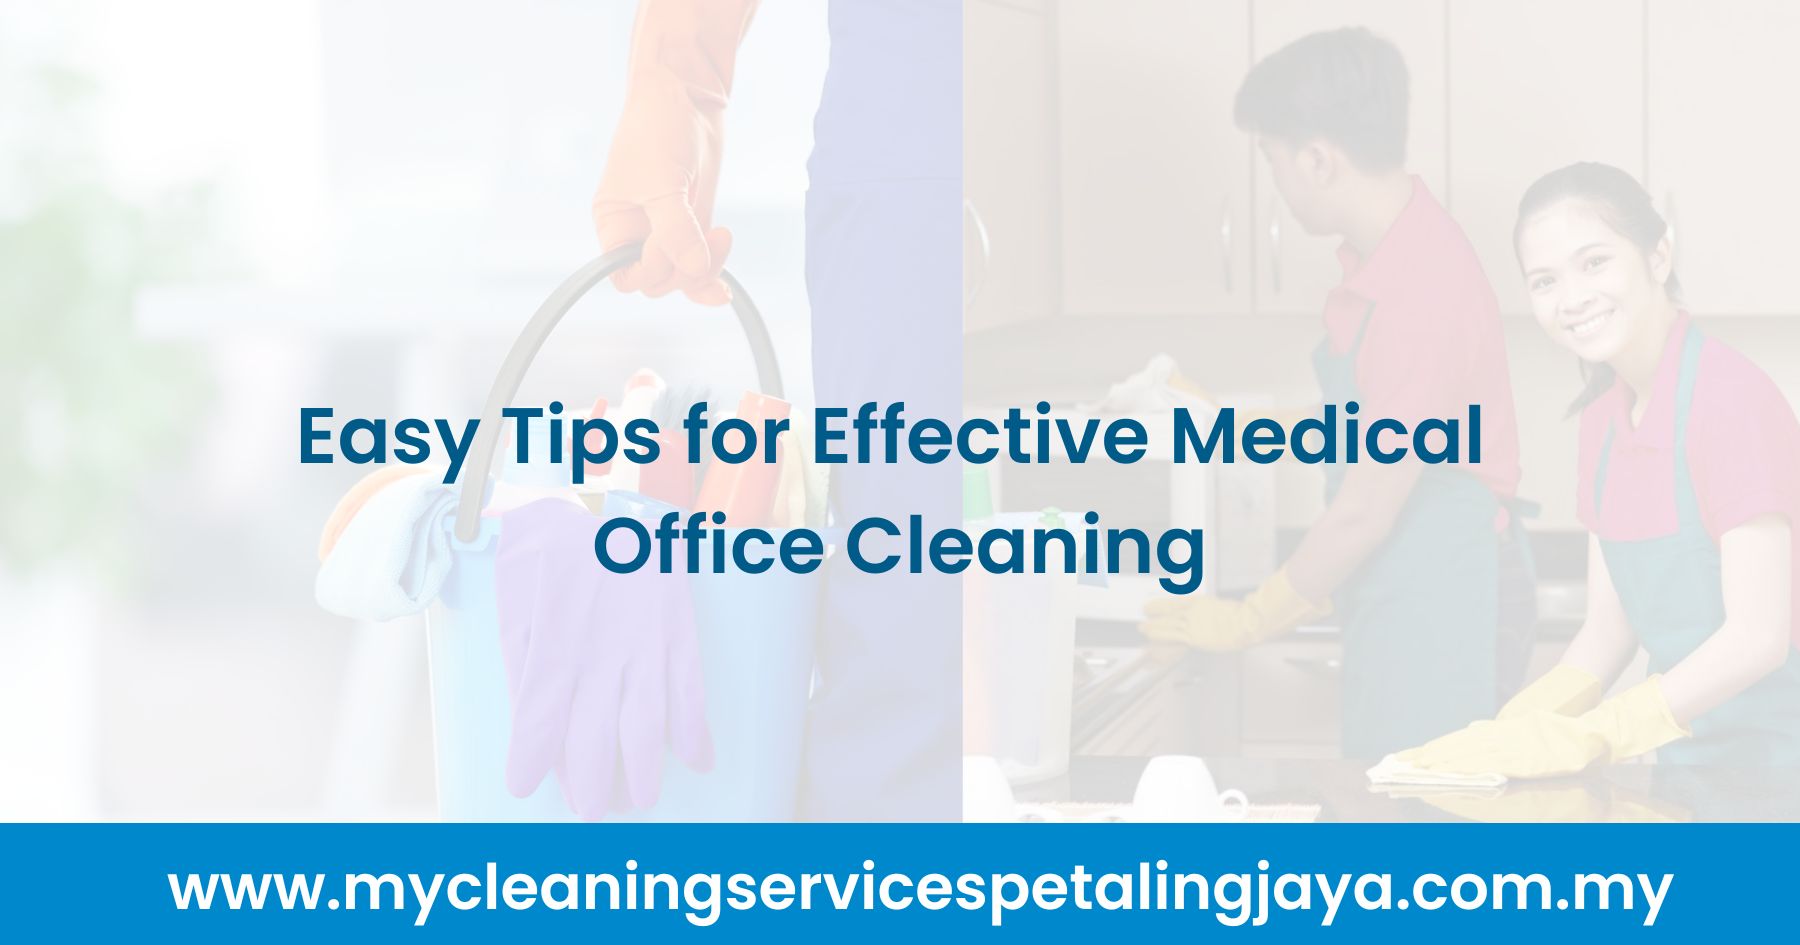 Easy Tips for Effective Medical Office Cleaning